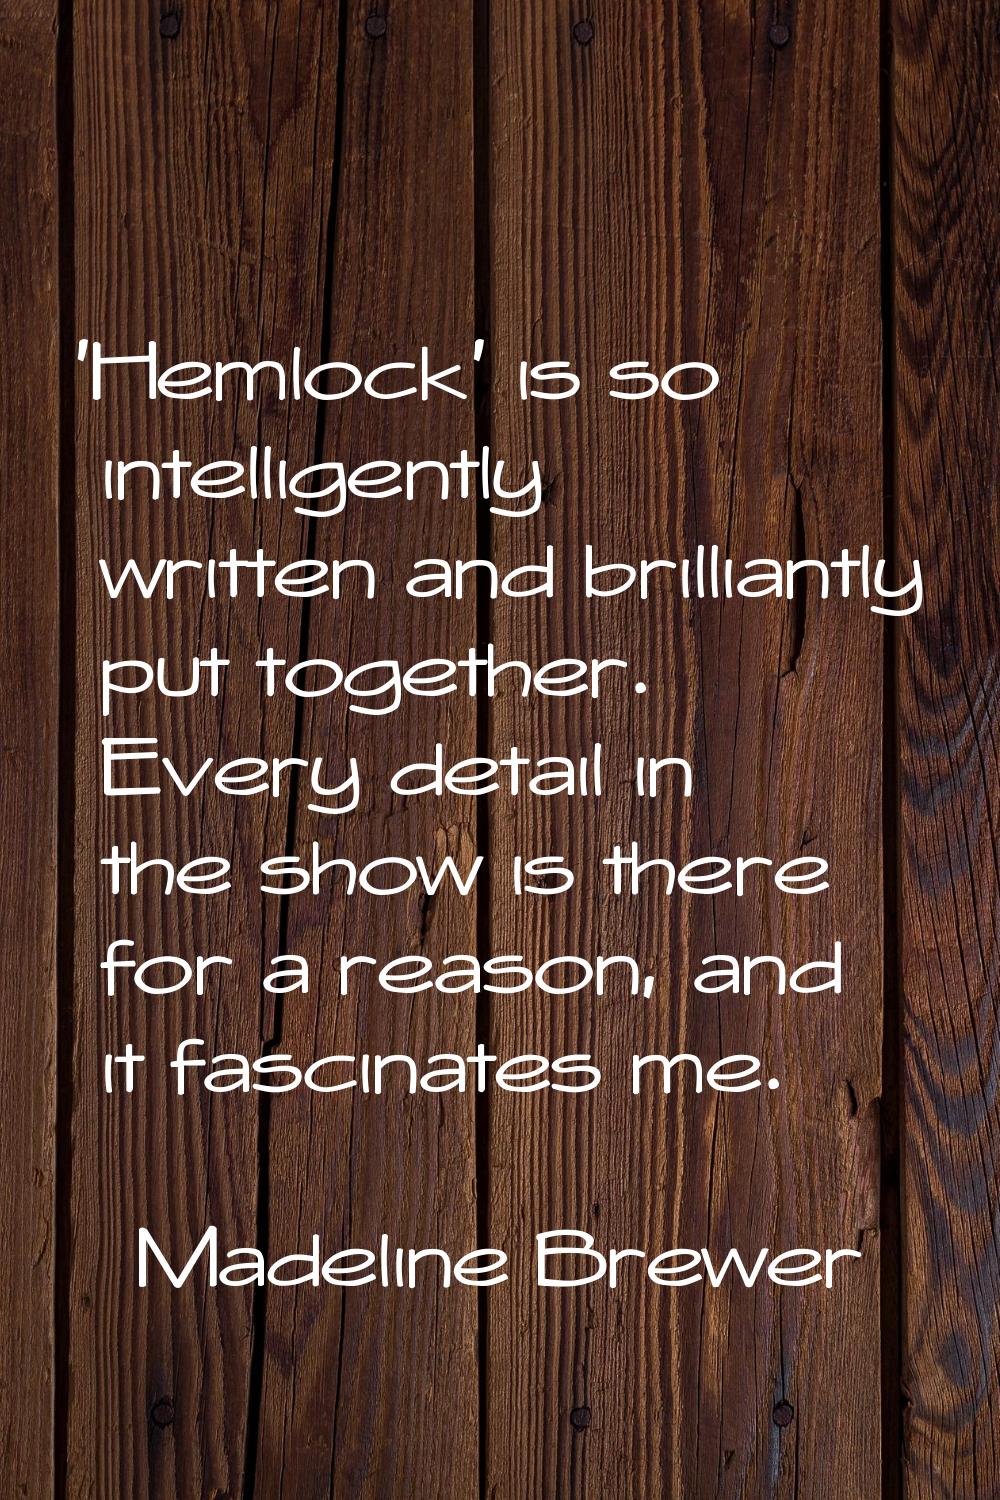 'Hemlock' is so intelligently written and brilliantly put together. Every detail in the show is the